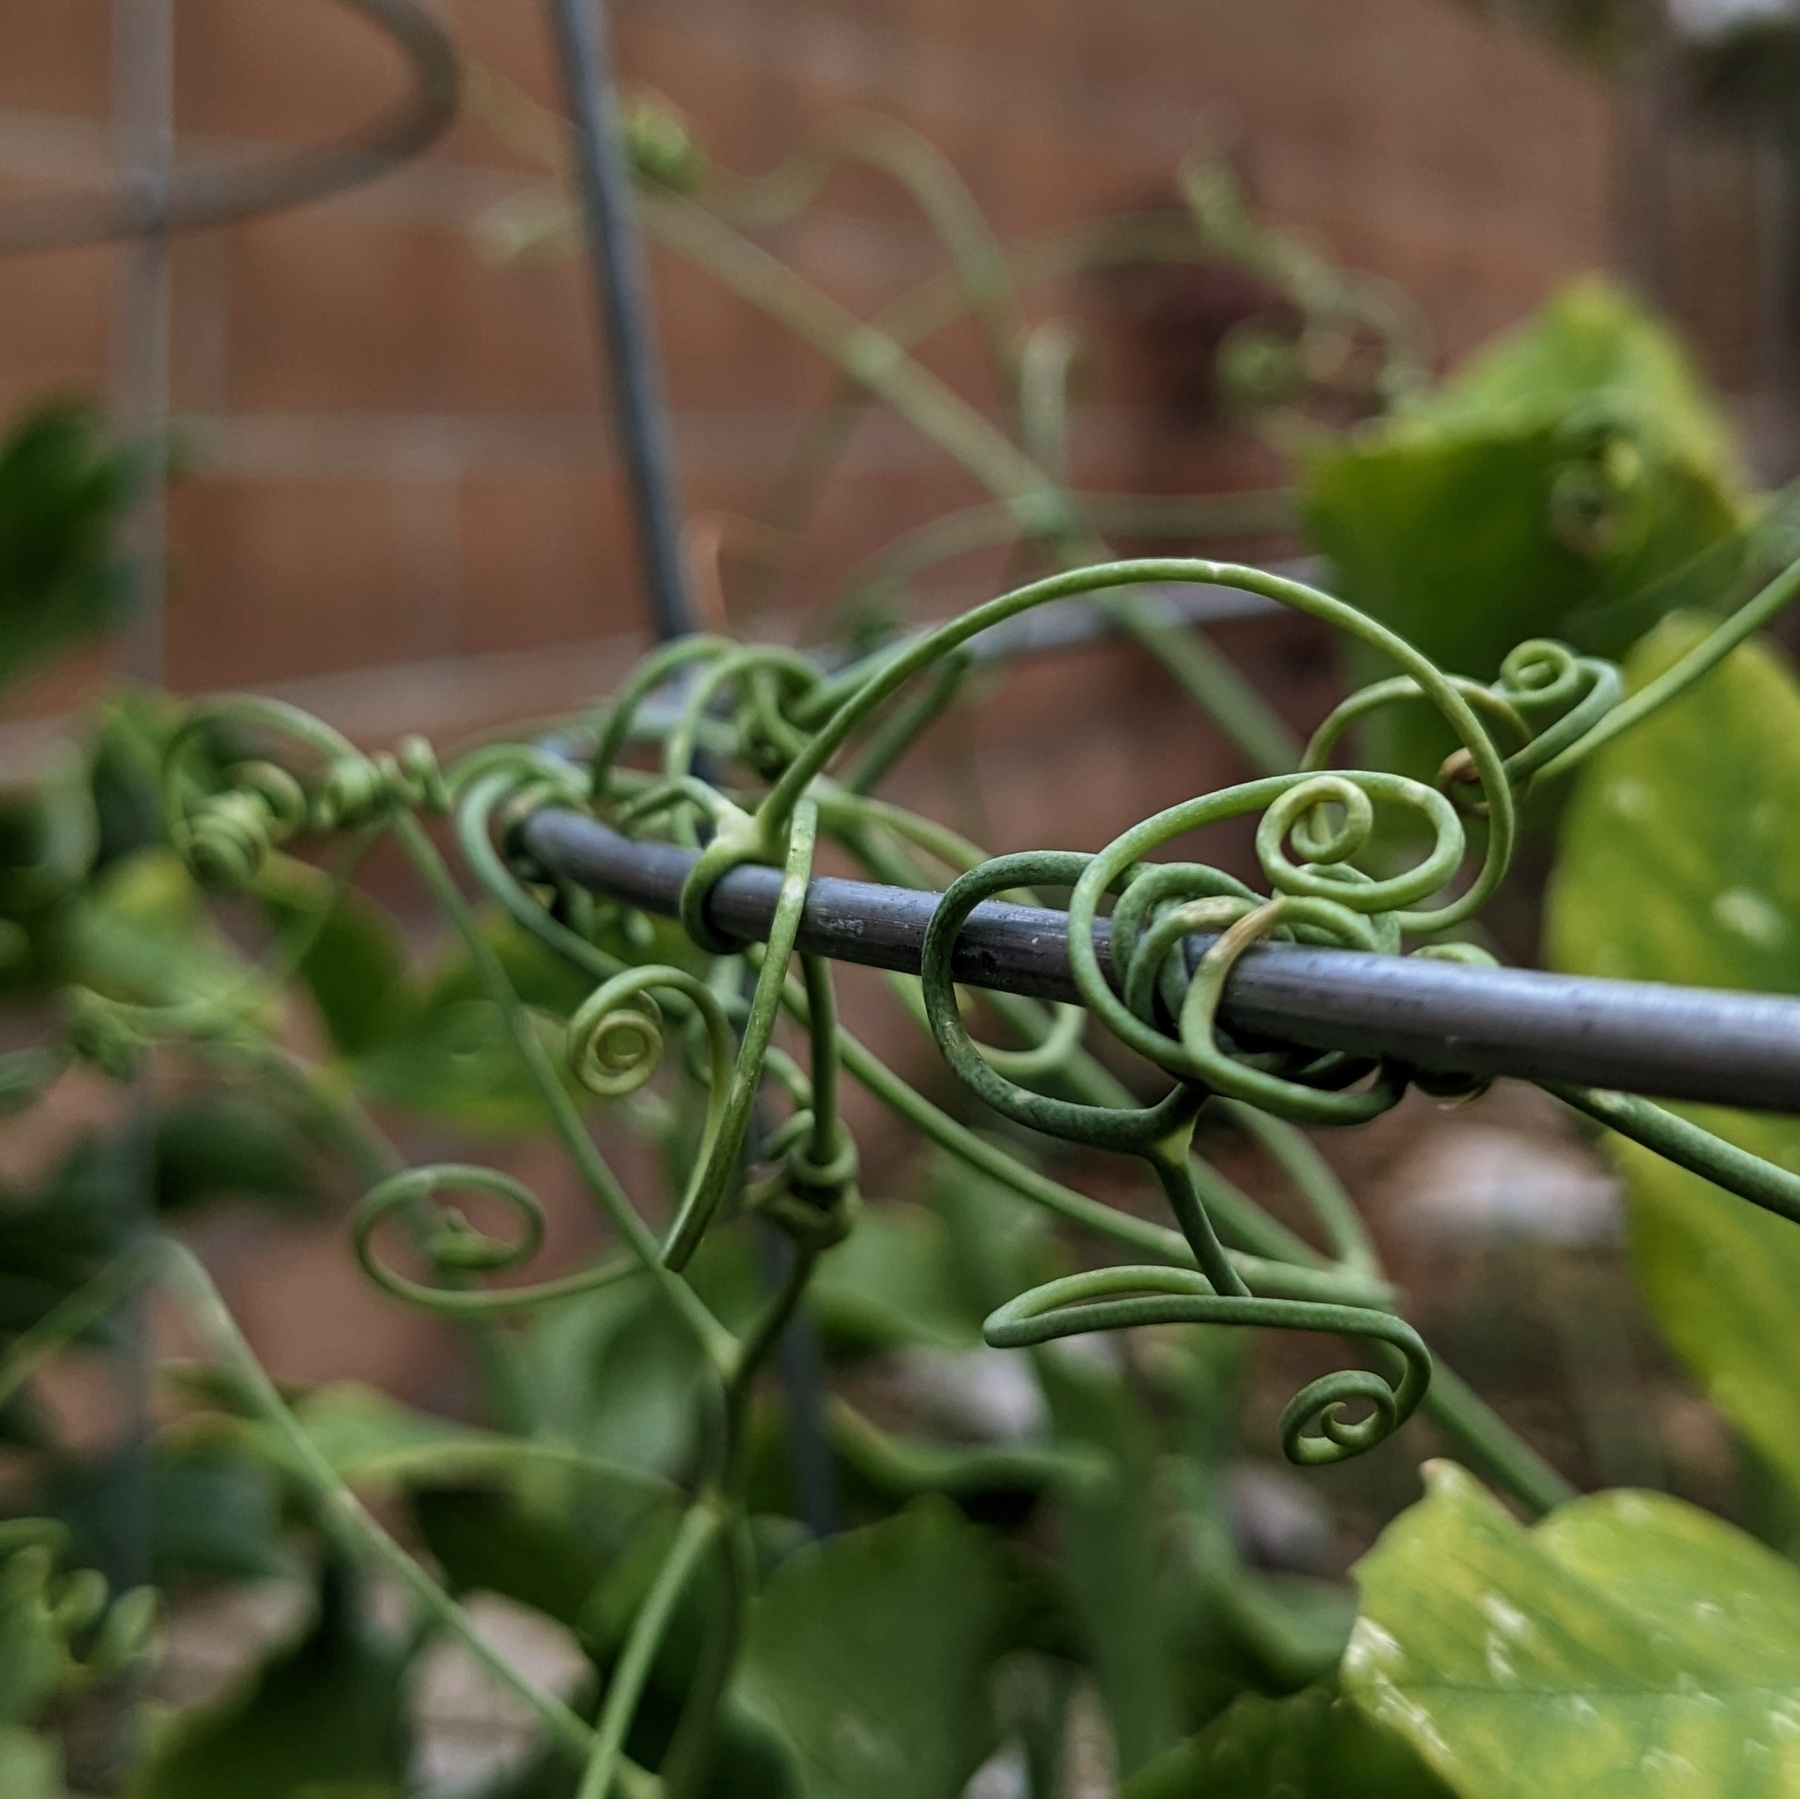 A close up of a bunch of pea vines wrapping around each other and a wire cage.